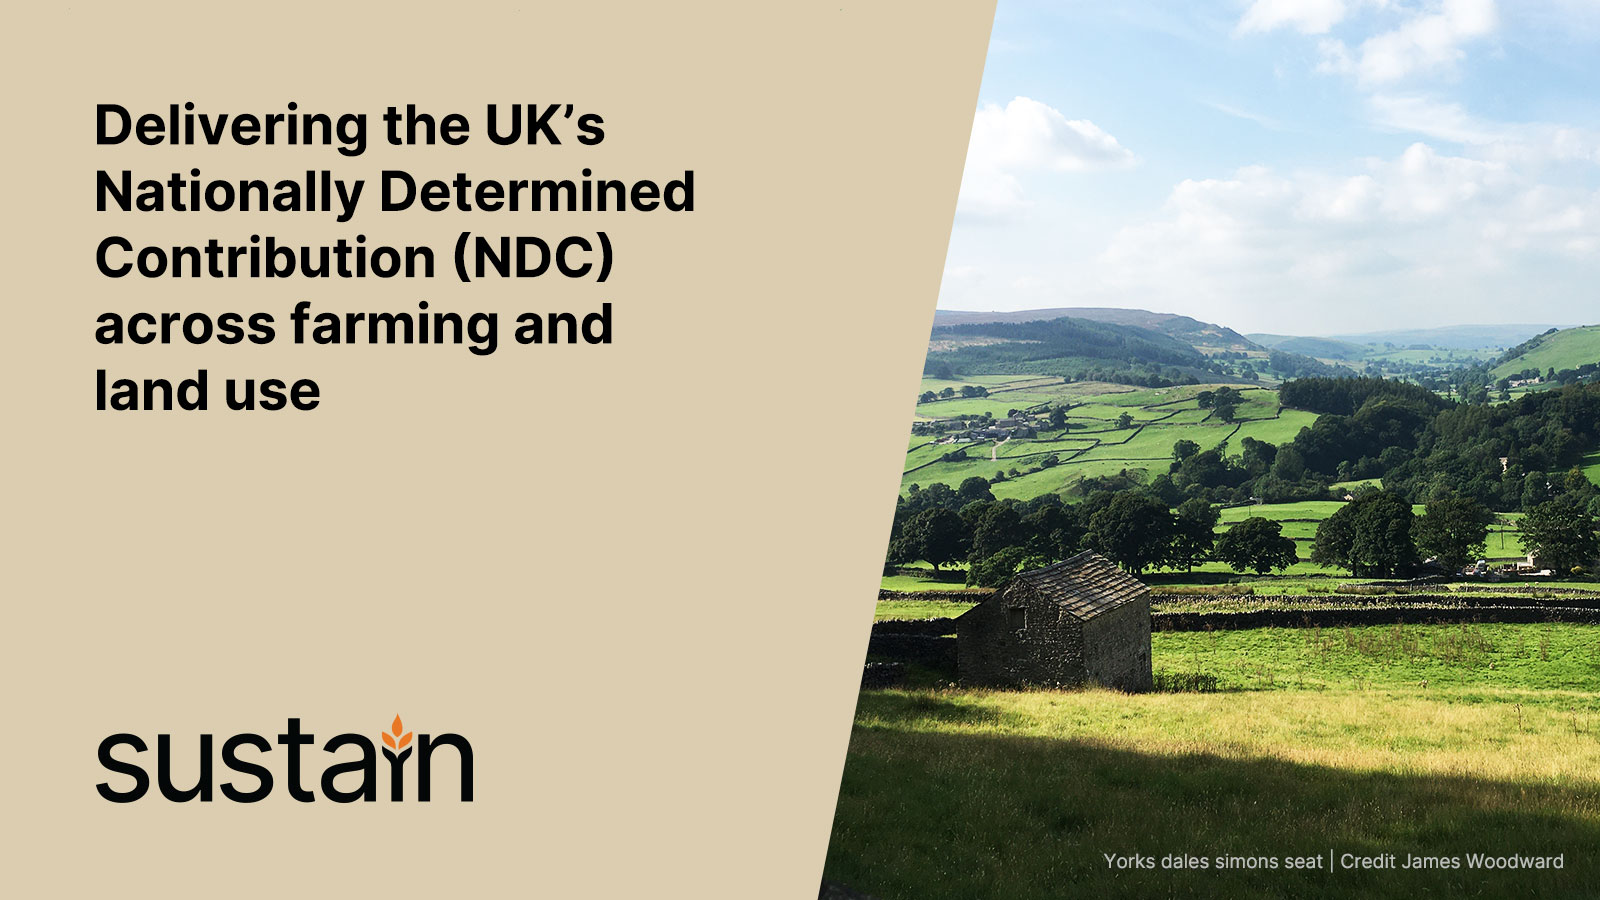 Delivering the UK’s Nationally Determined Contribution (NDC) across farming and land use